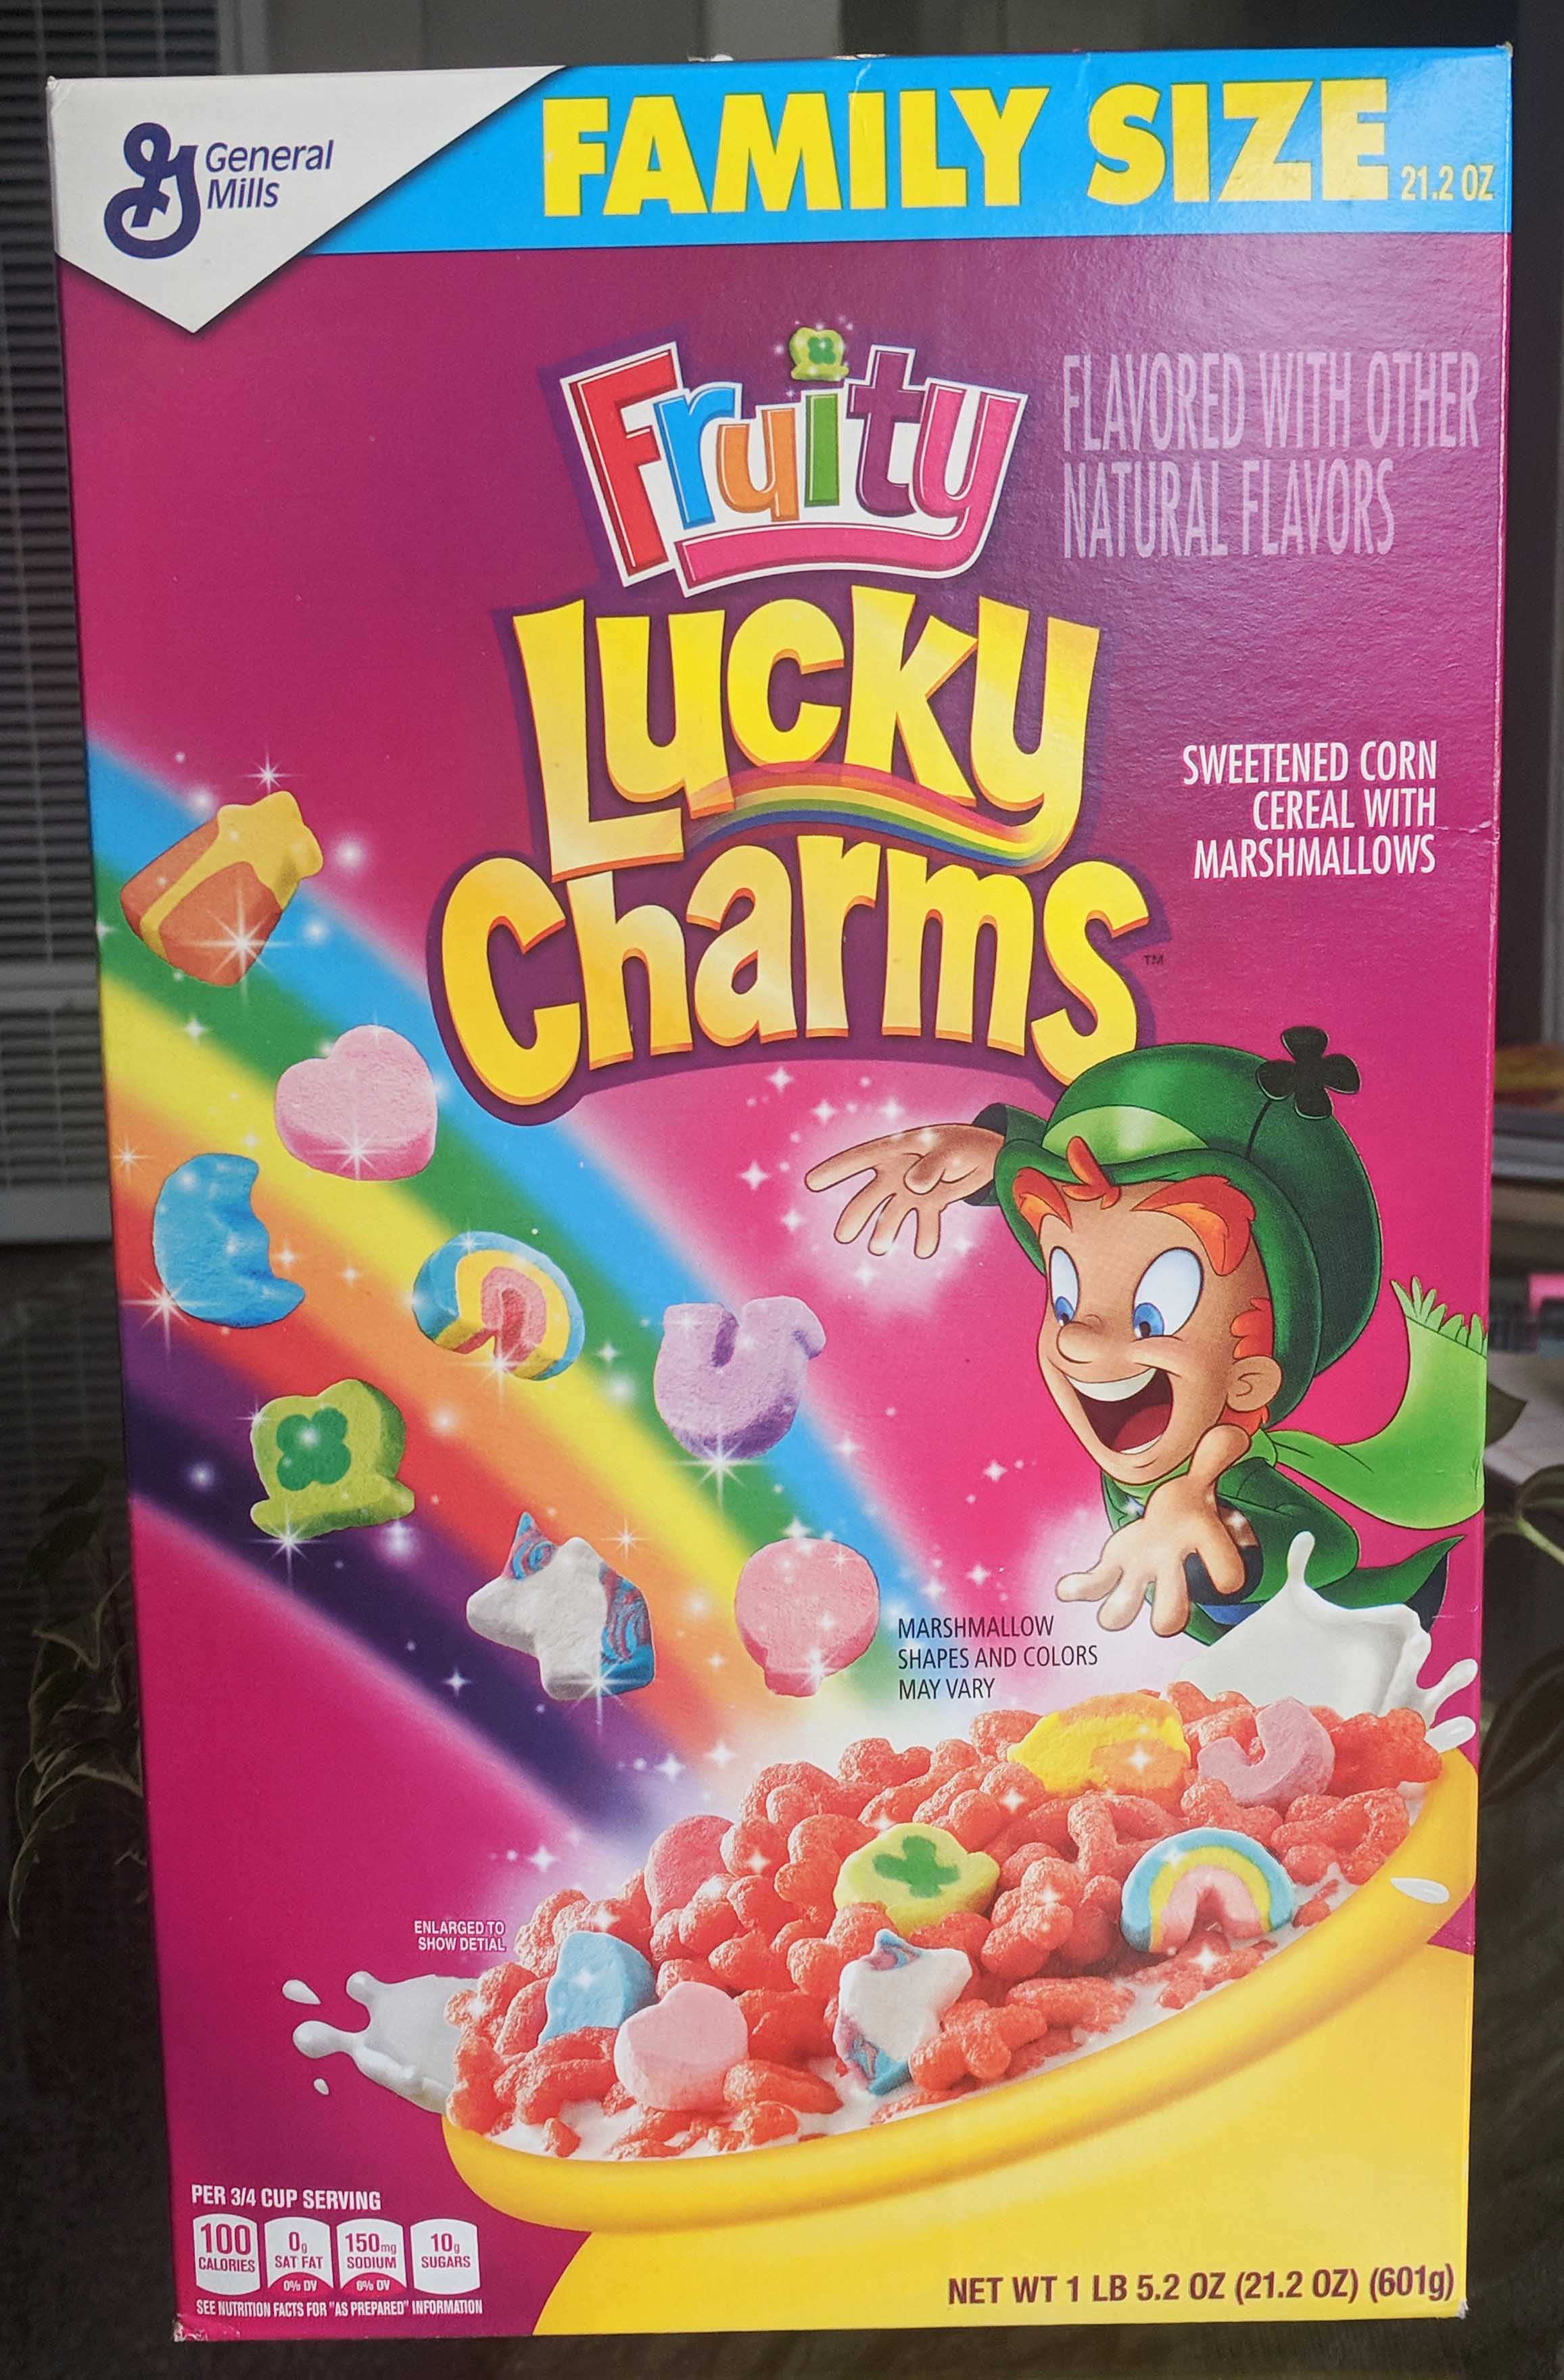 berry lucky charms